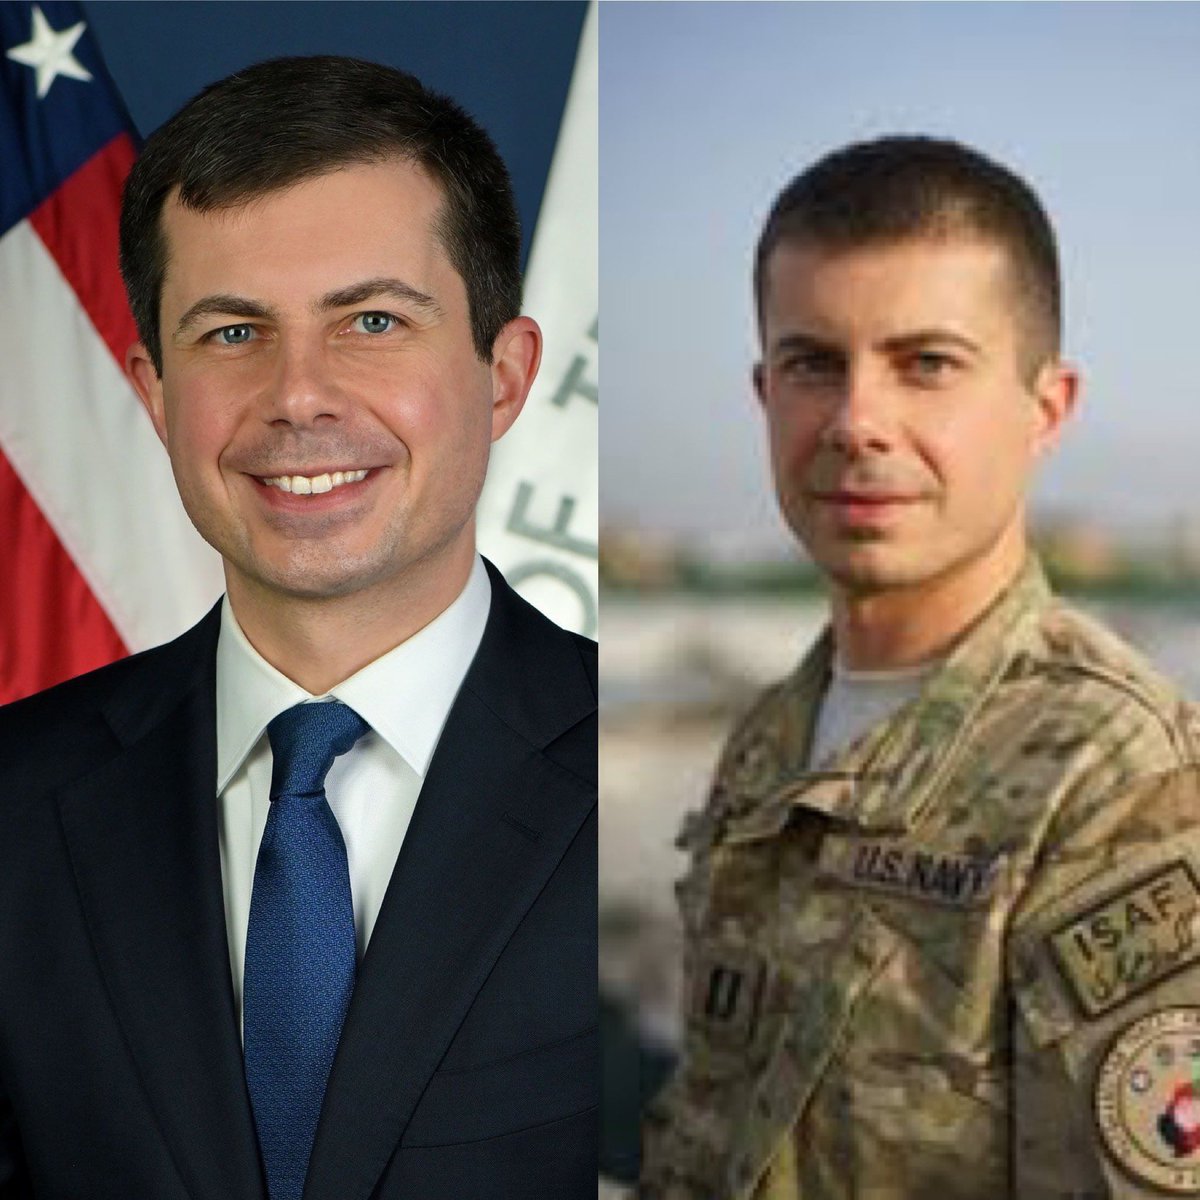 While Bone Spurs was filming season 7 of Celebrity Apprentice, Pete Buttigieg was heading to Afghanistan! Secretary Mayor Pete is a hero and will make a great president someday! Drop a 💙 and Repost if you agree!